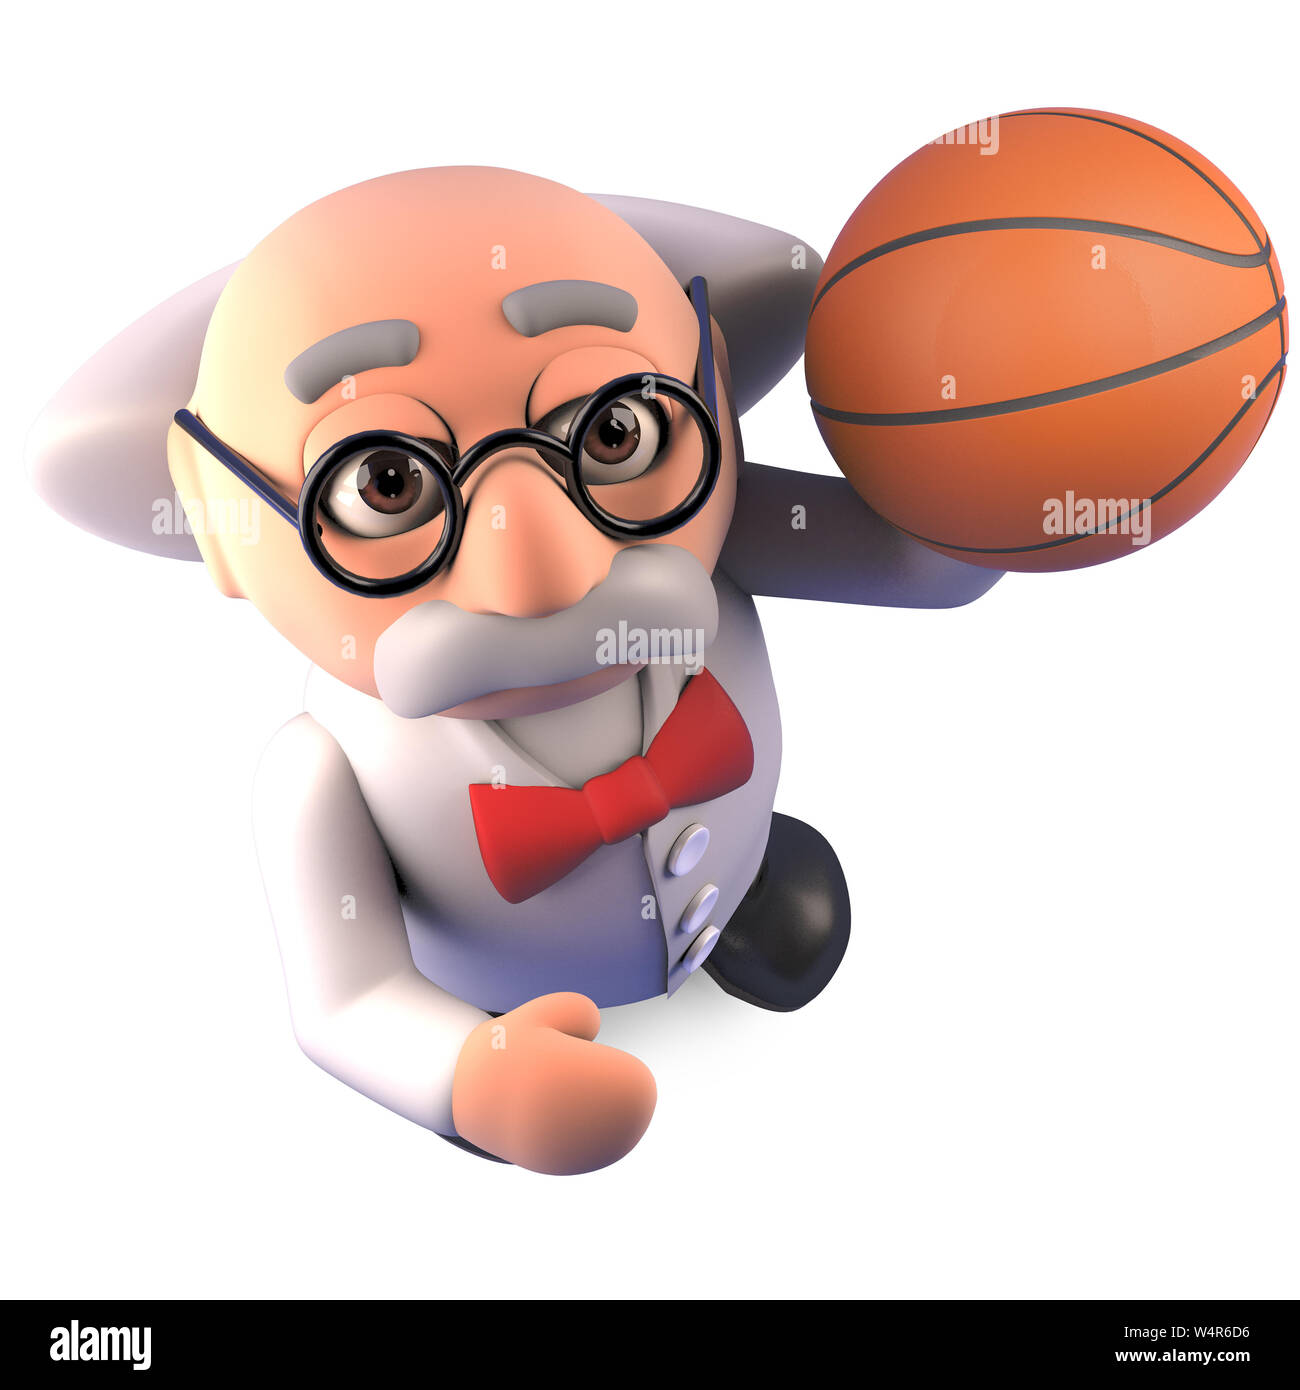 Mad scientist professor shoots a few hoops with his basketball when thinking, 3d illustration render Stock Photo